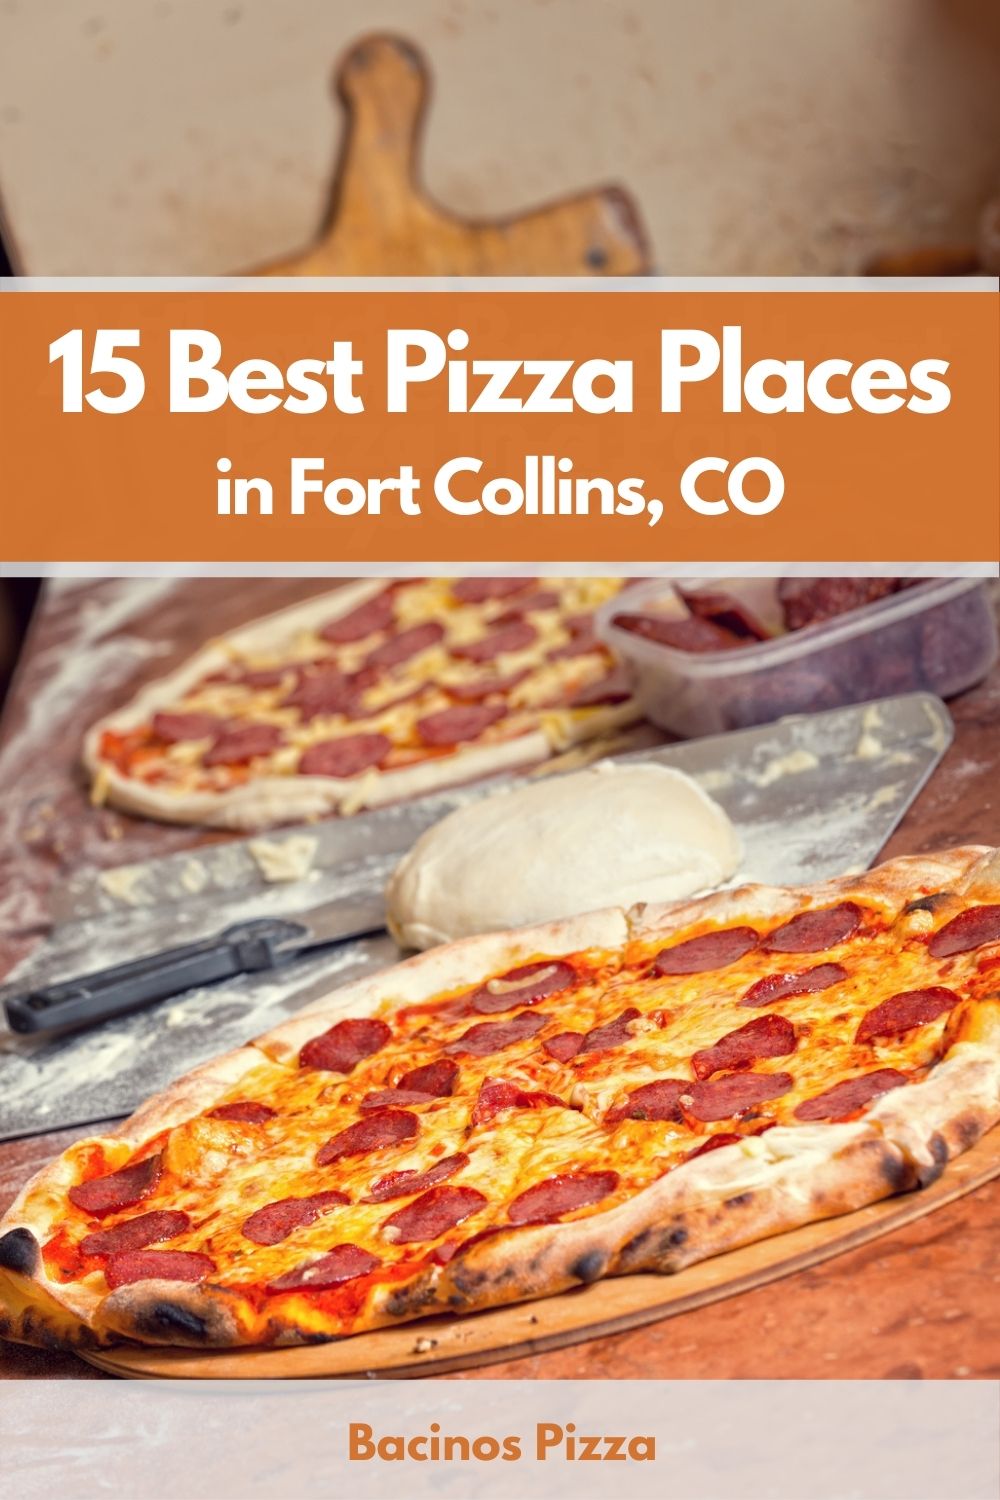 15 Best Pizza Places in Fort Collins CO pin 2